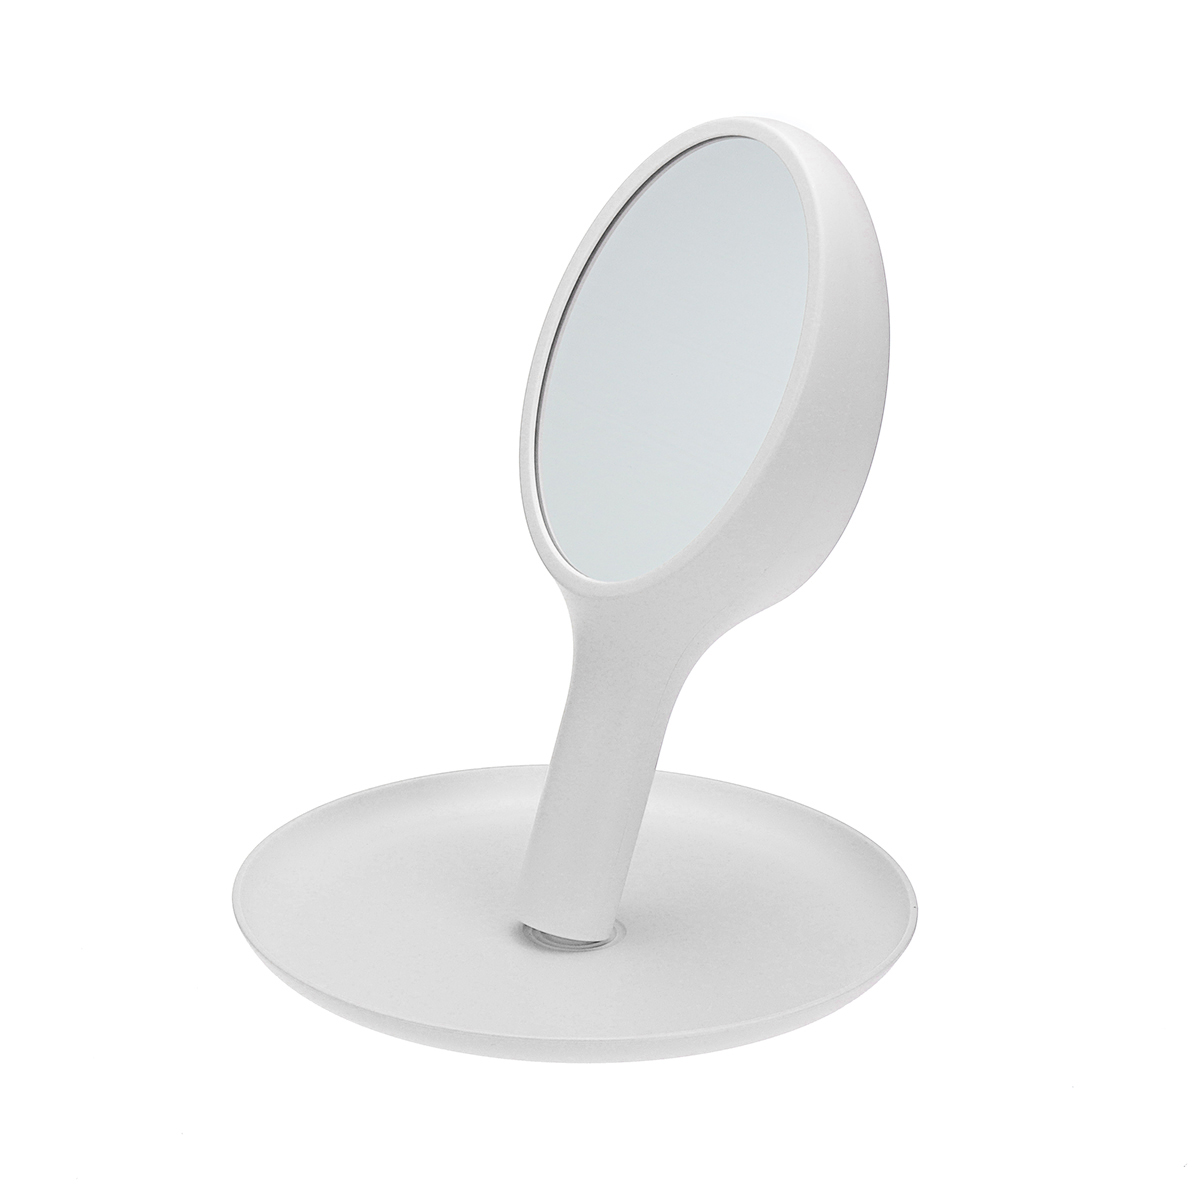 Double-Sided-Table-Makeup-Mirrors-Desktop-Cosmetics-Dressing-Beauty-Rotating-1643702-2